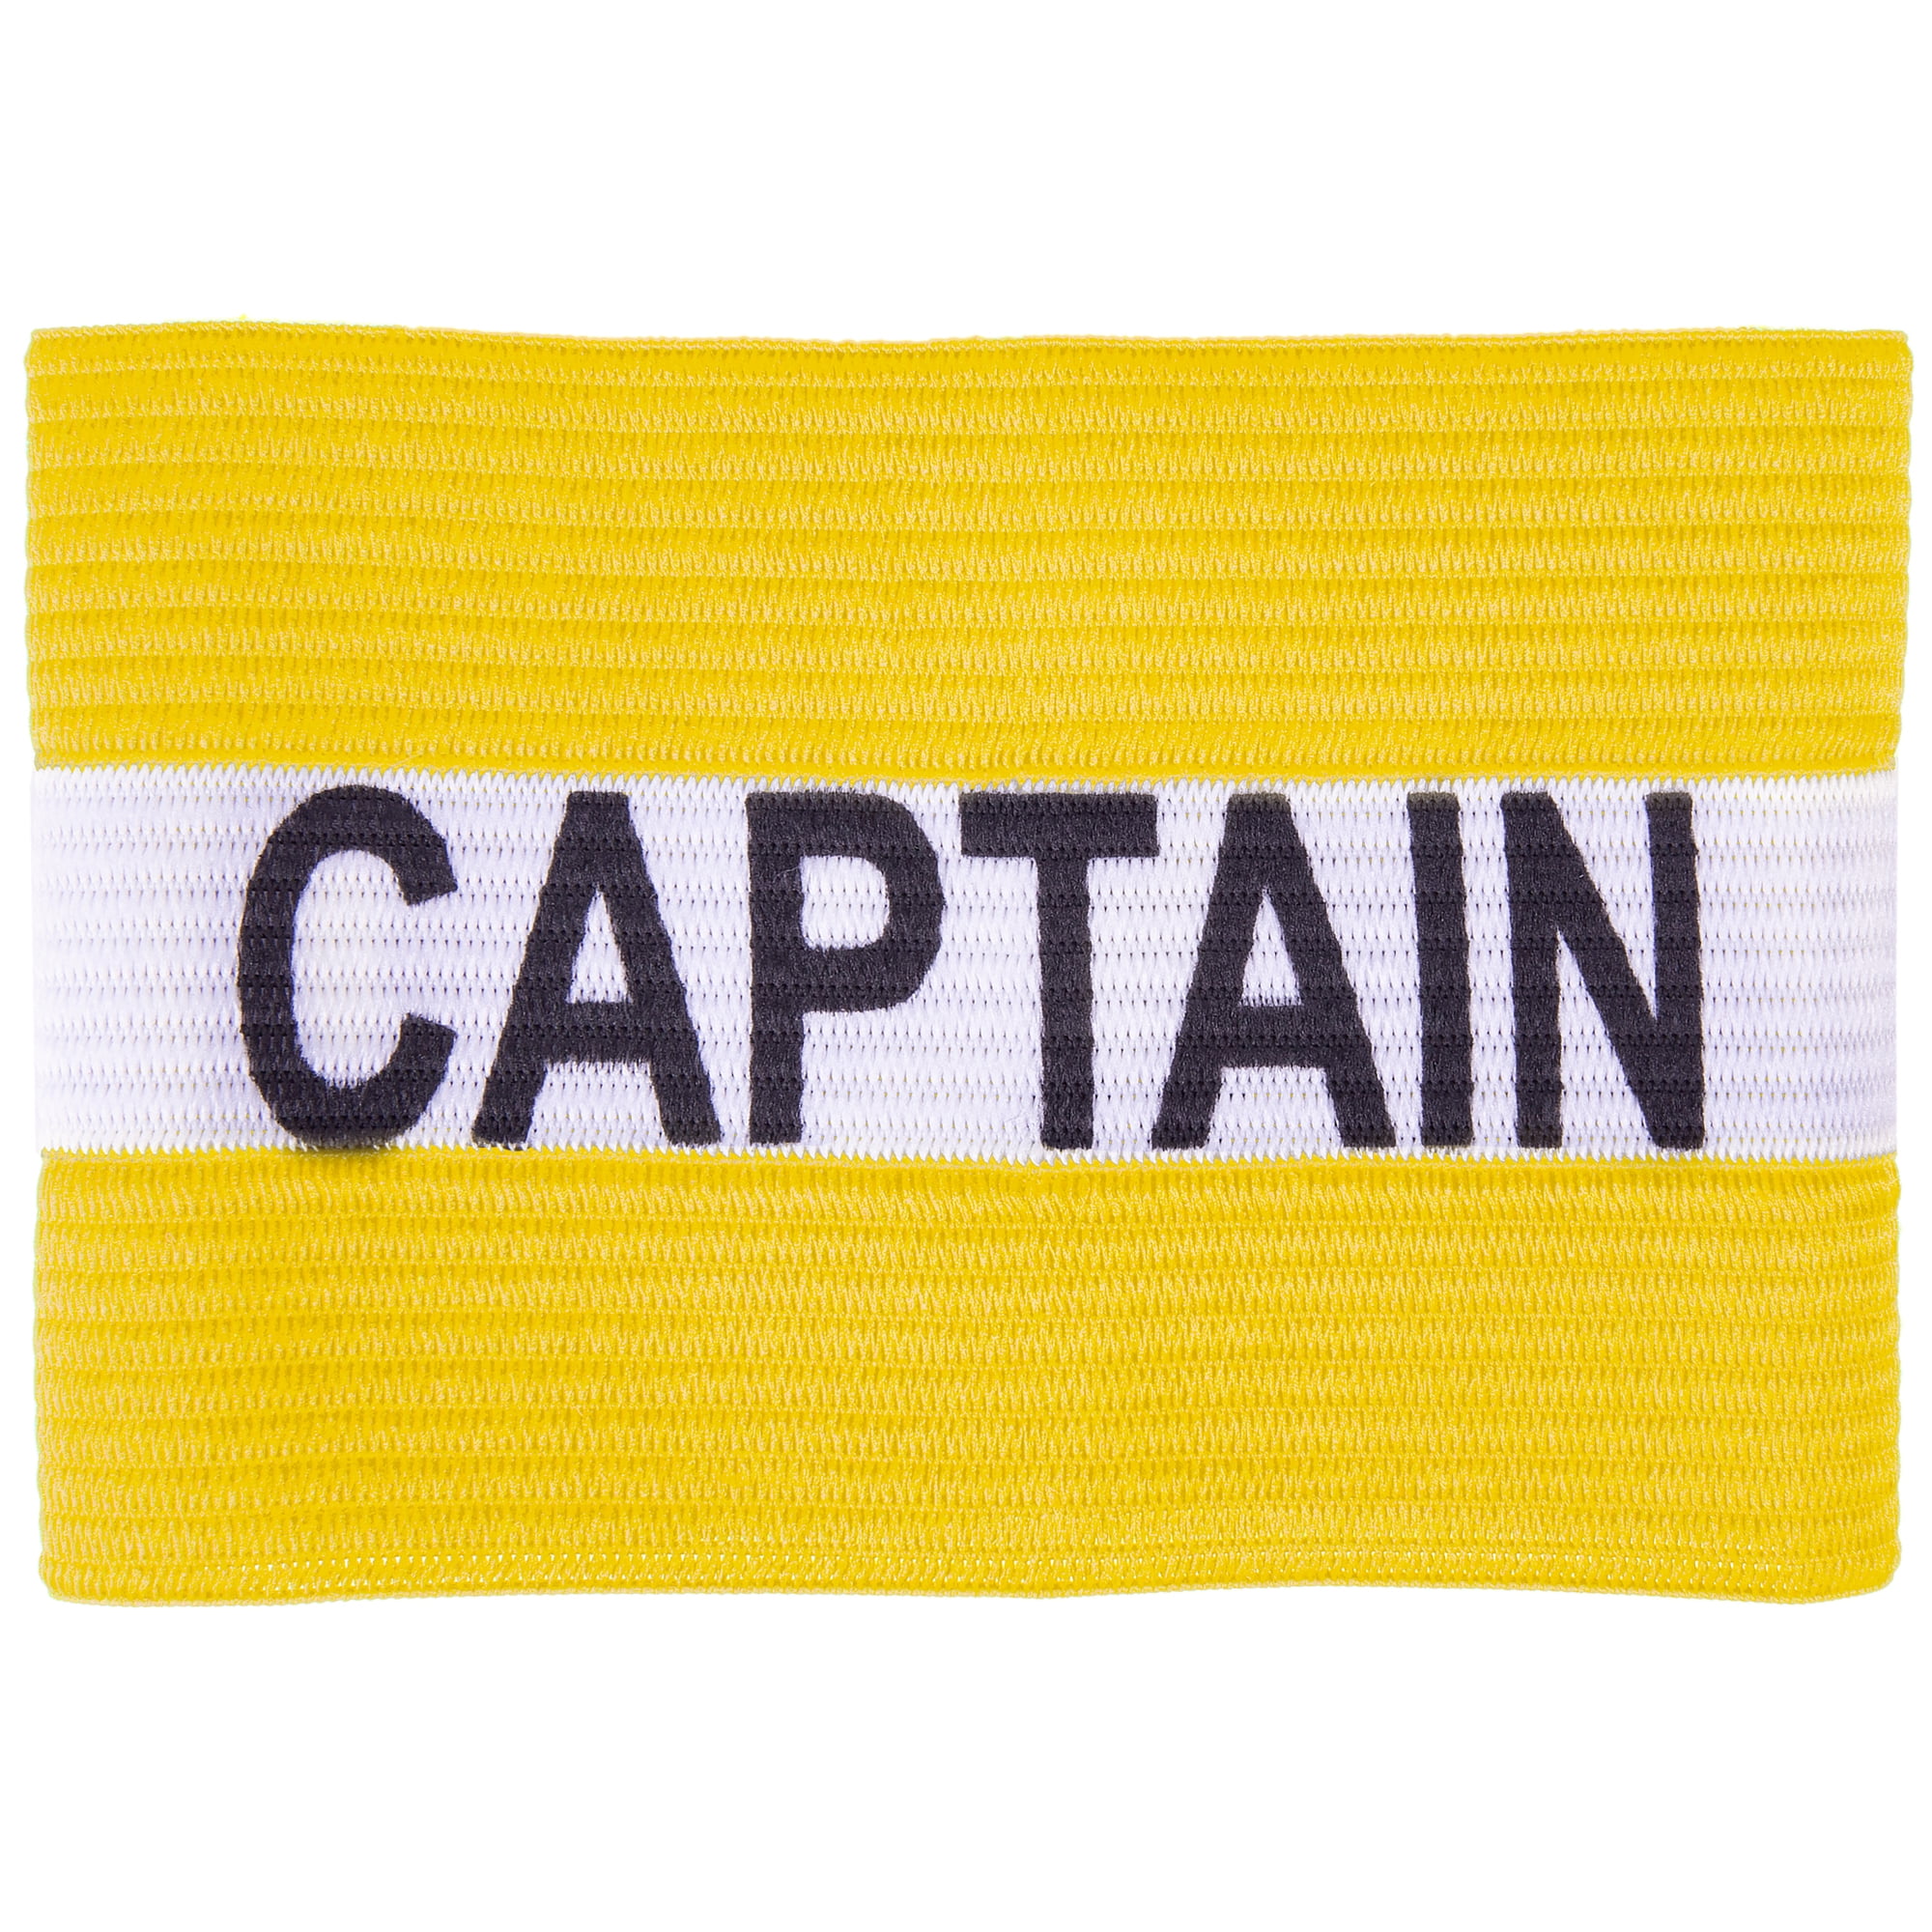 Picture of Brybelly SSCR-801 Captain Armband, Black - Adult